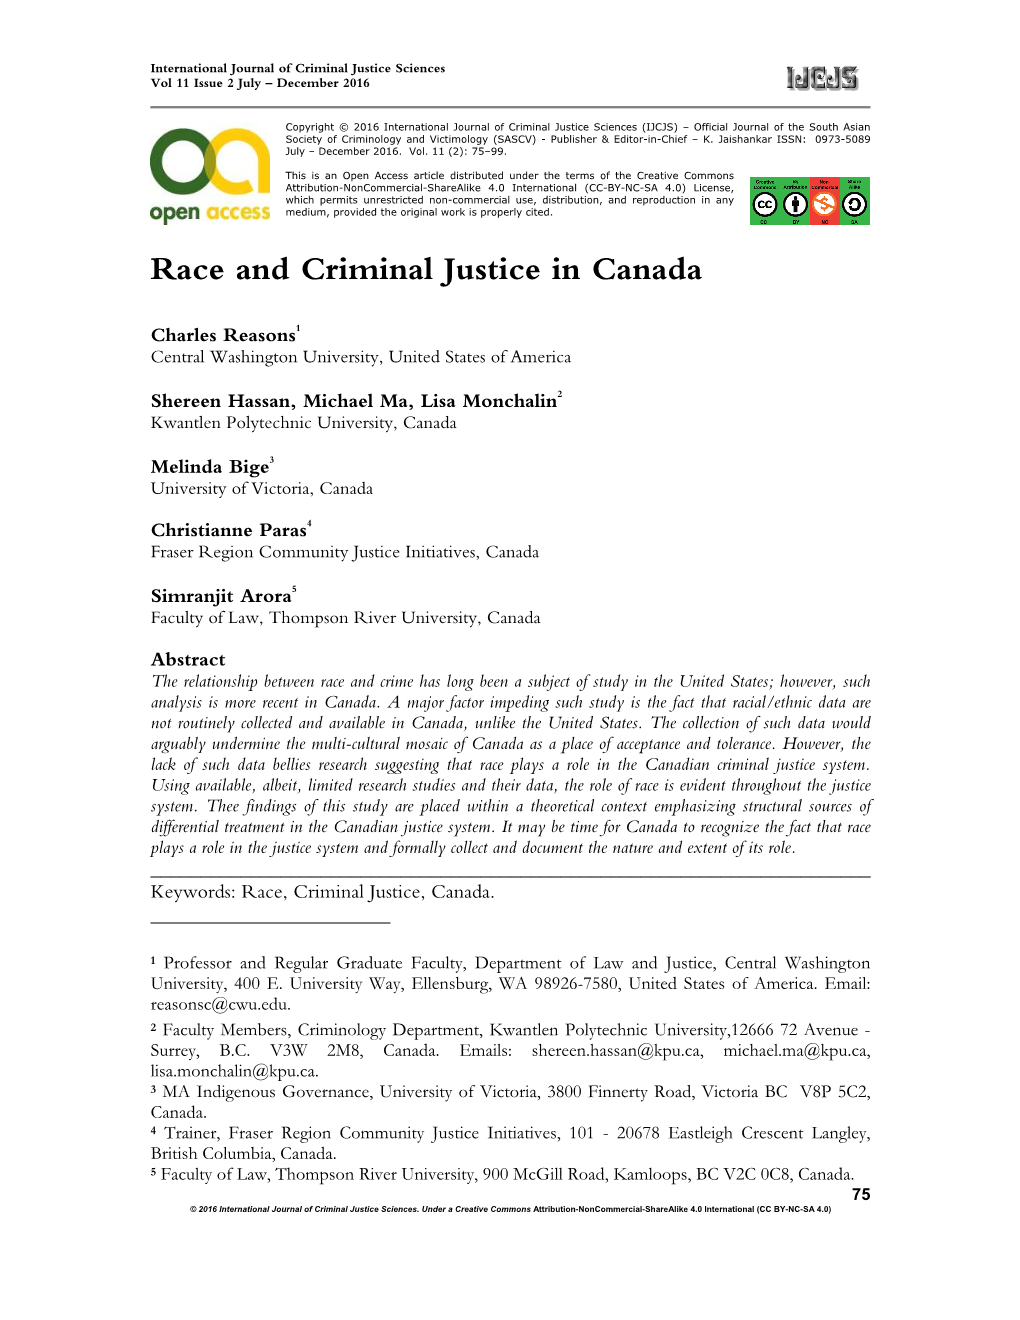 Race and Criminal Justice in Canada